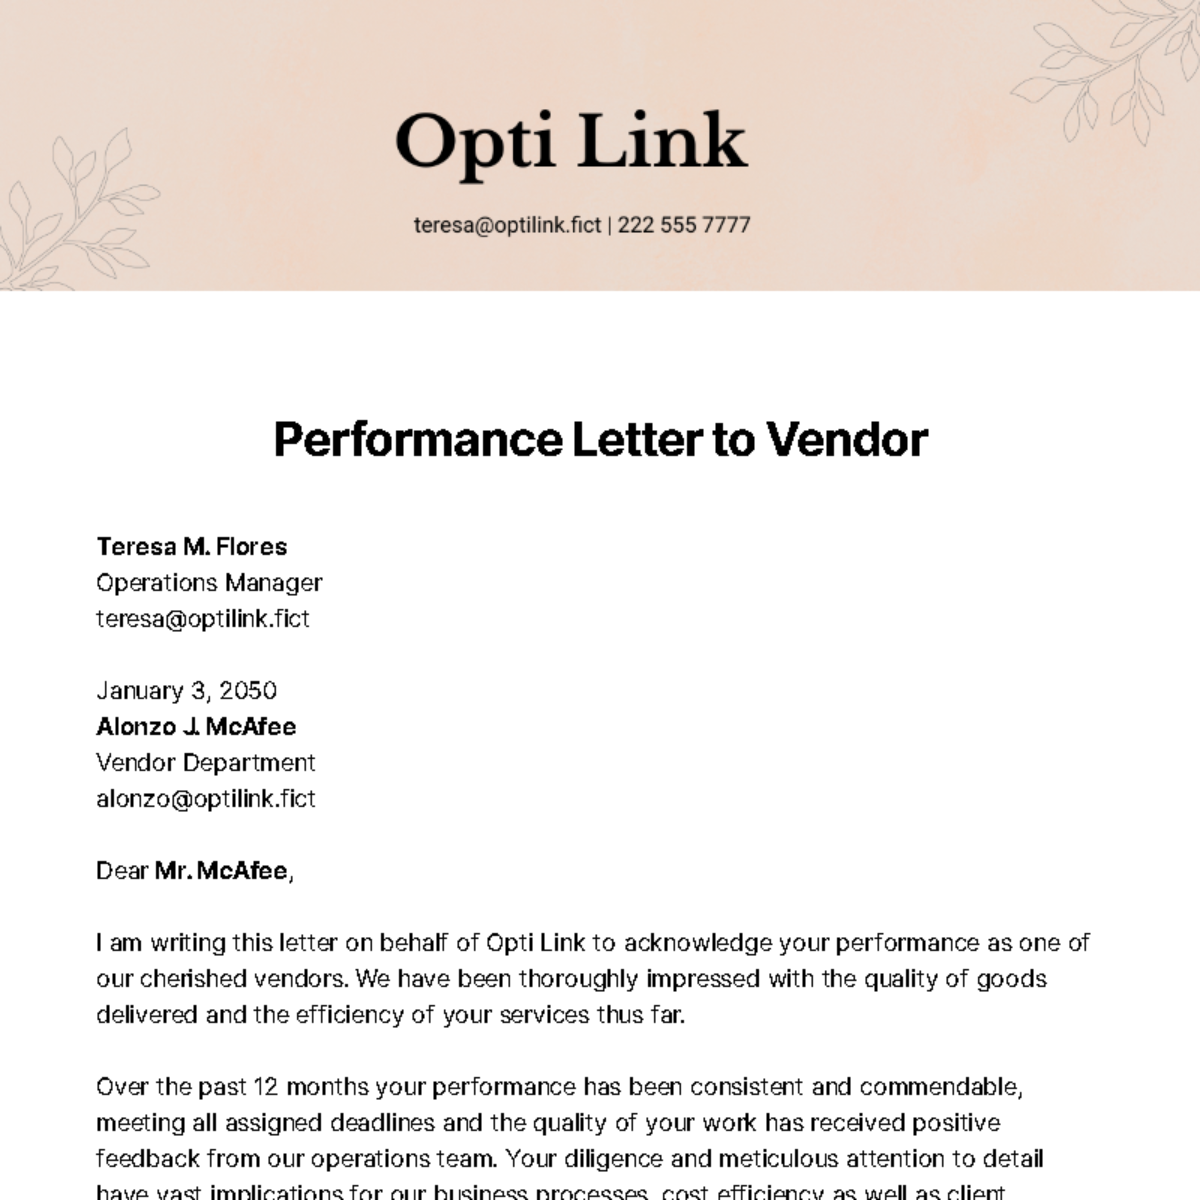 Performance Letter to Vendor Template